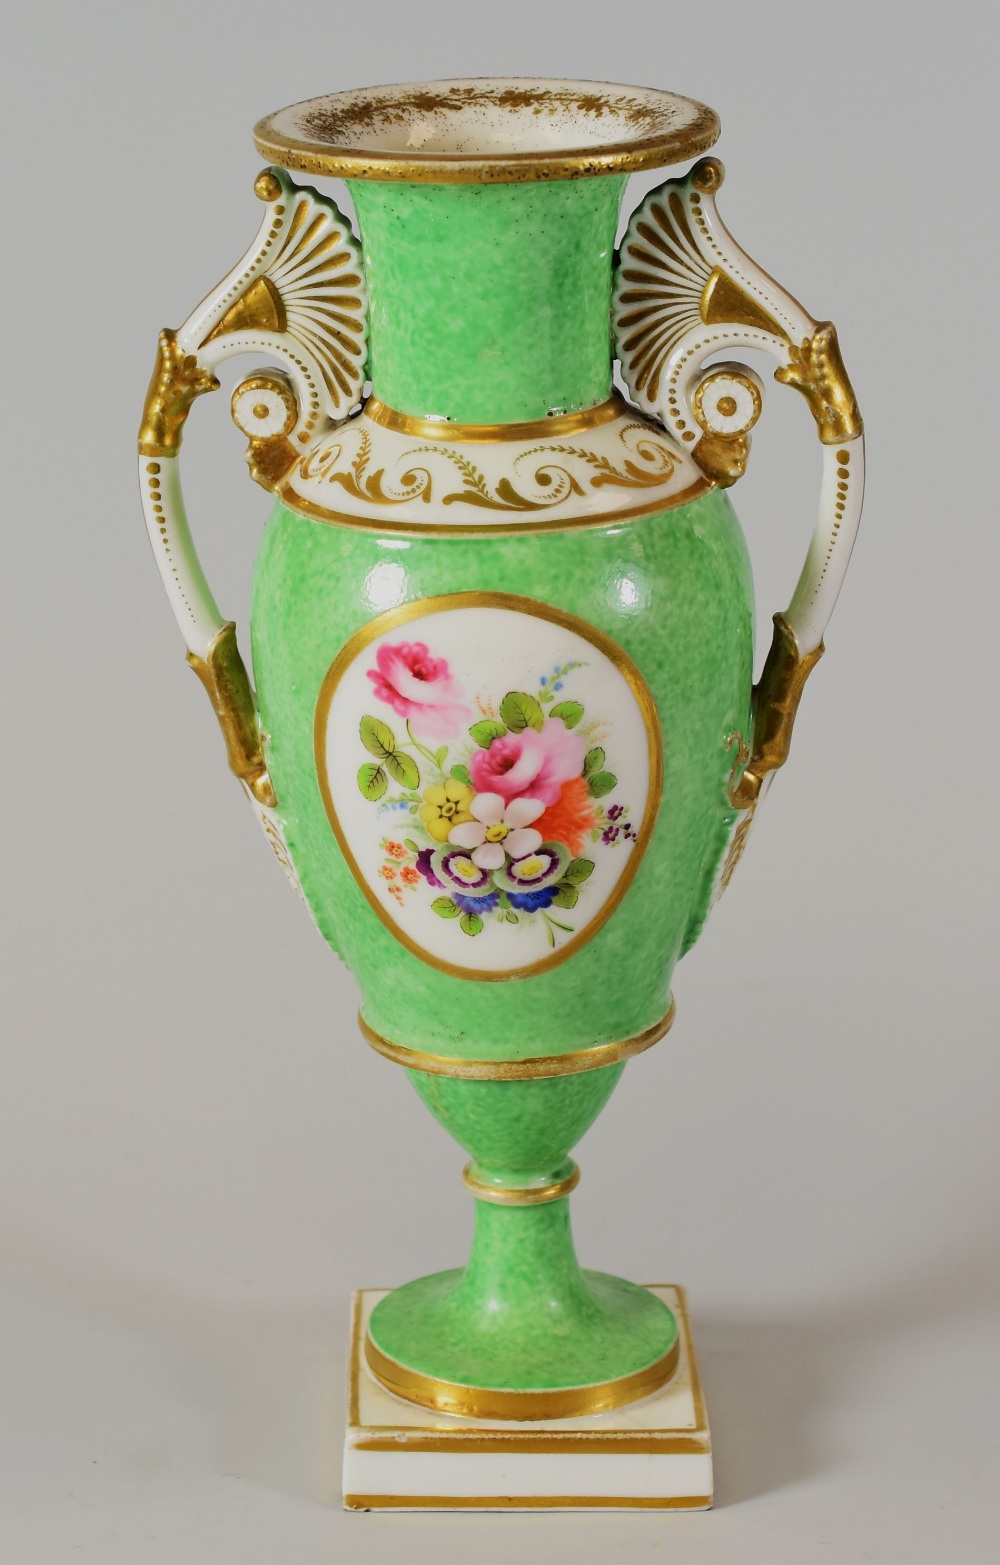 A SWANSEA PORCELAIN VASE with twin handles and of slender ovoid form, flared rim and with a round